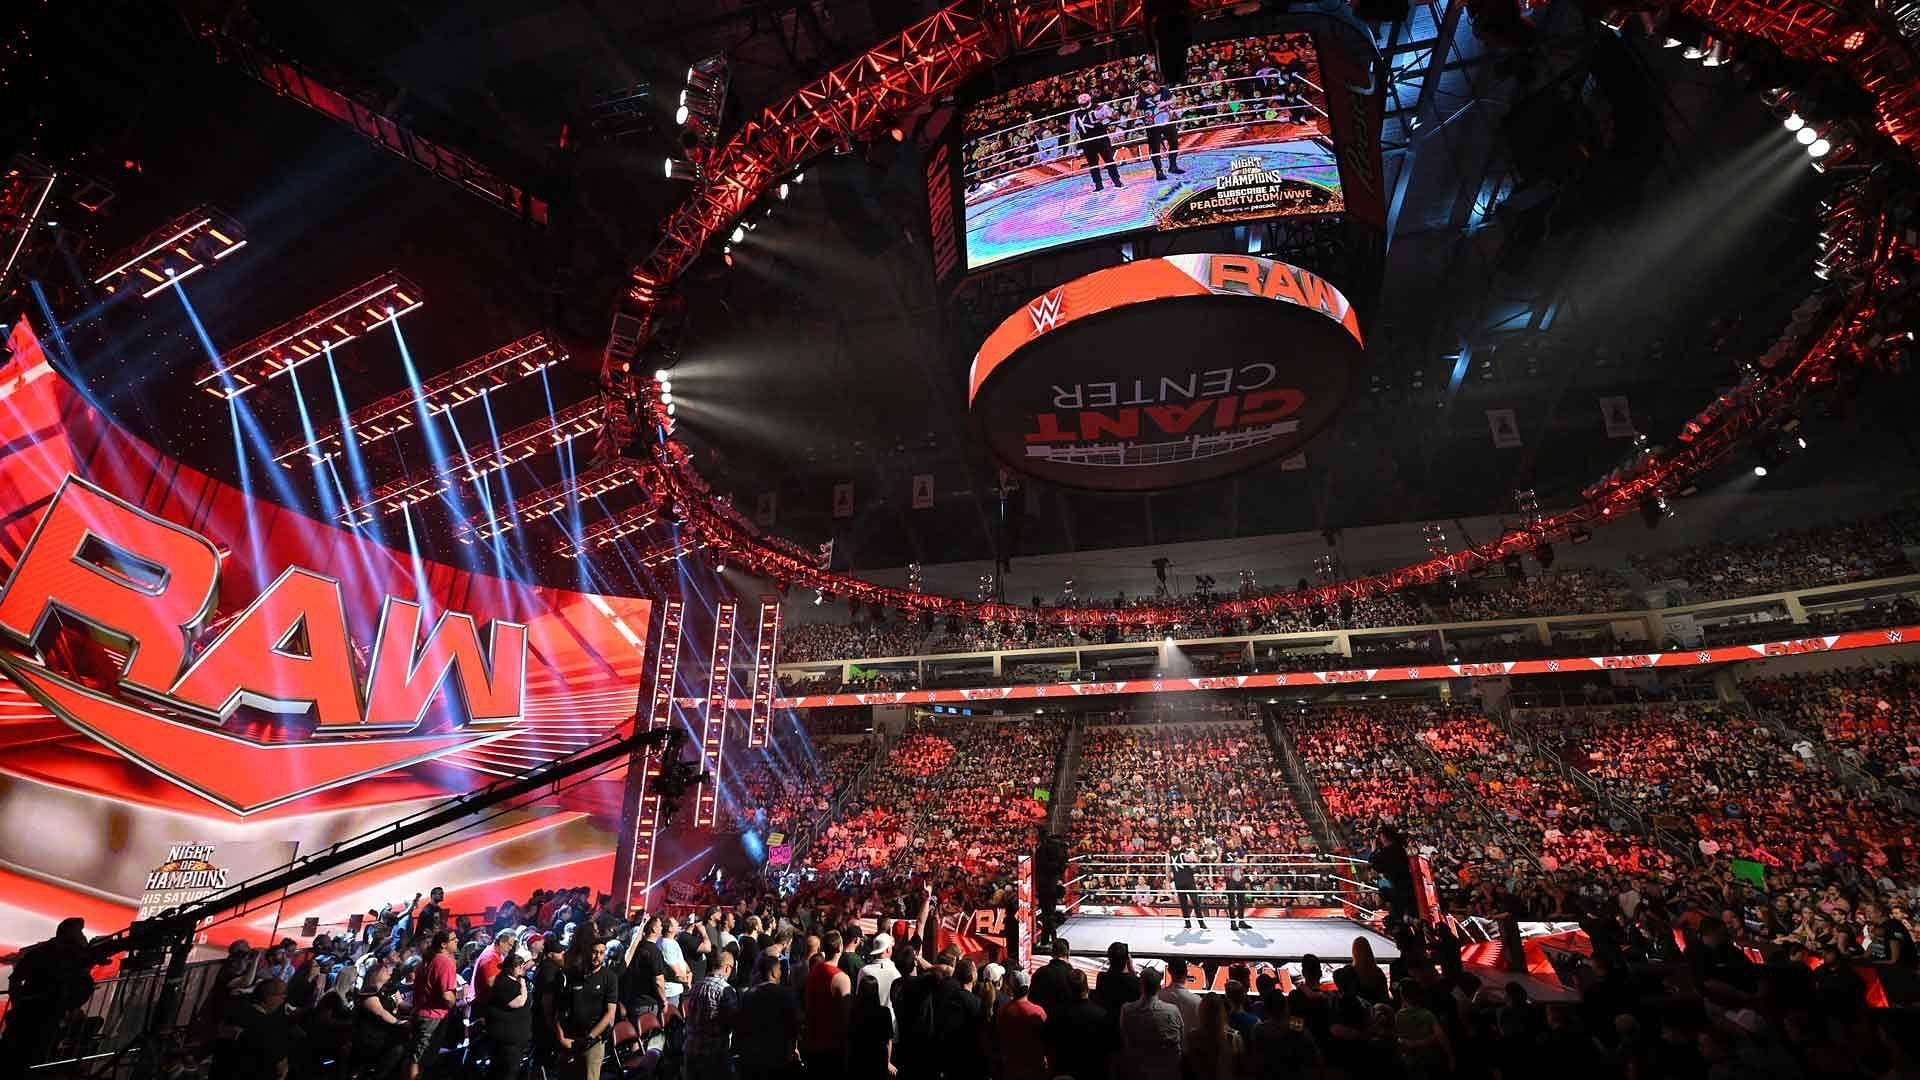 The WWE Universe packs the Giant Center for a live RAW